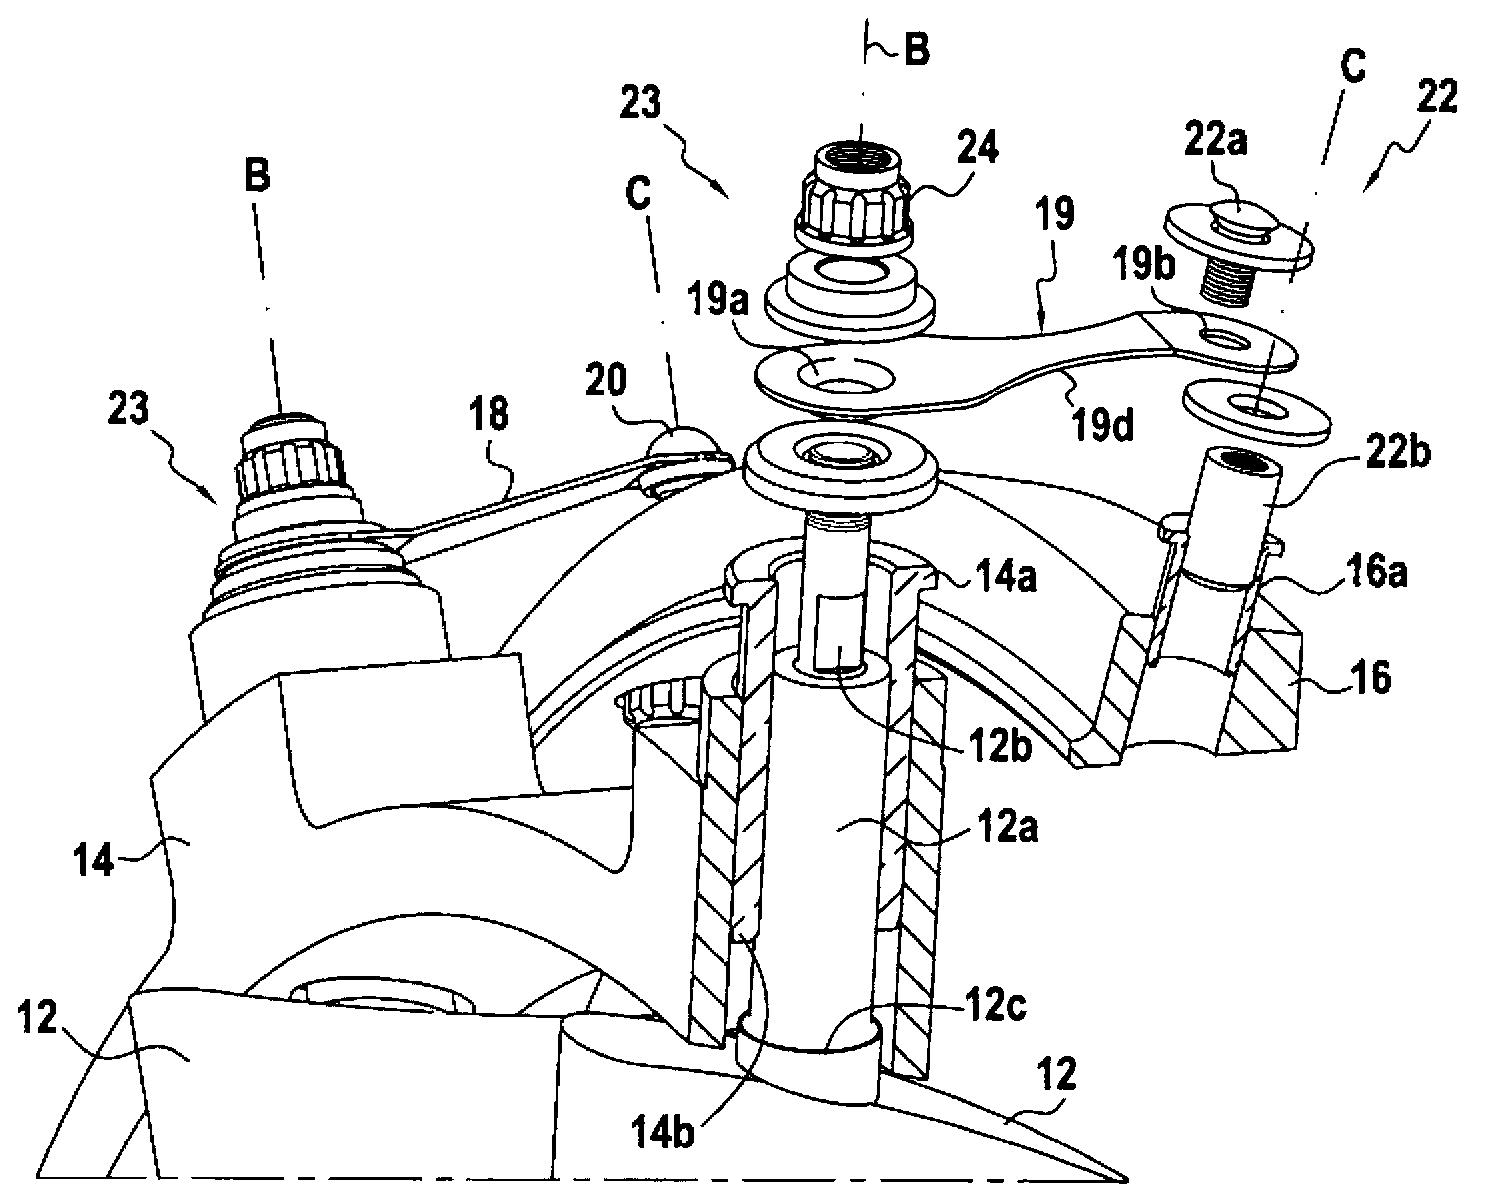 Device for controlling pivoting blades of a turbine engine